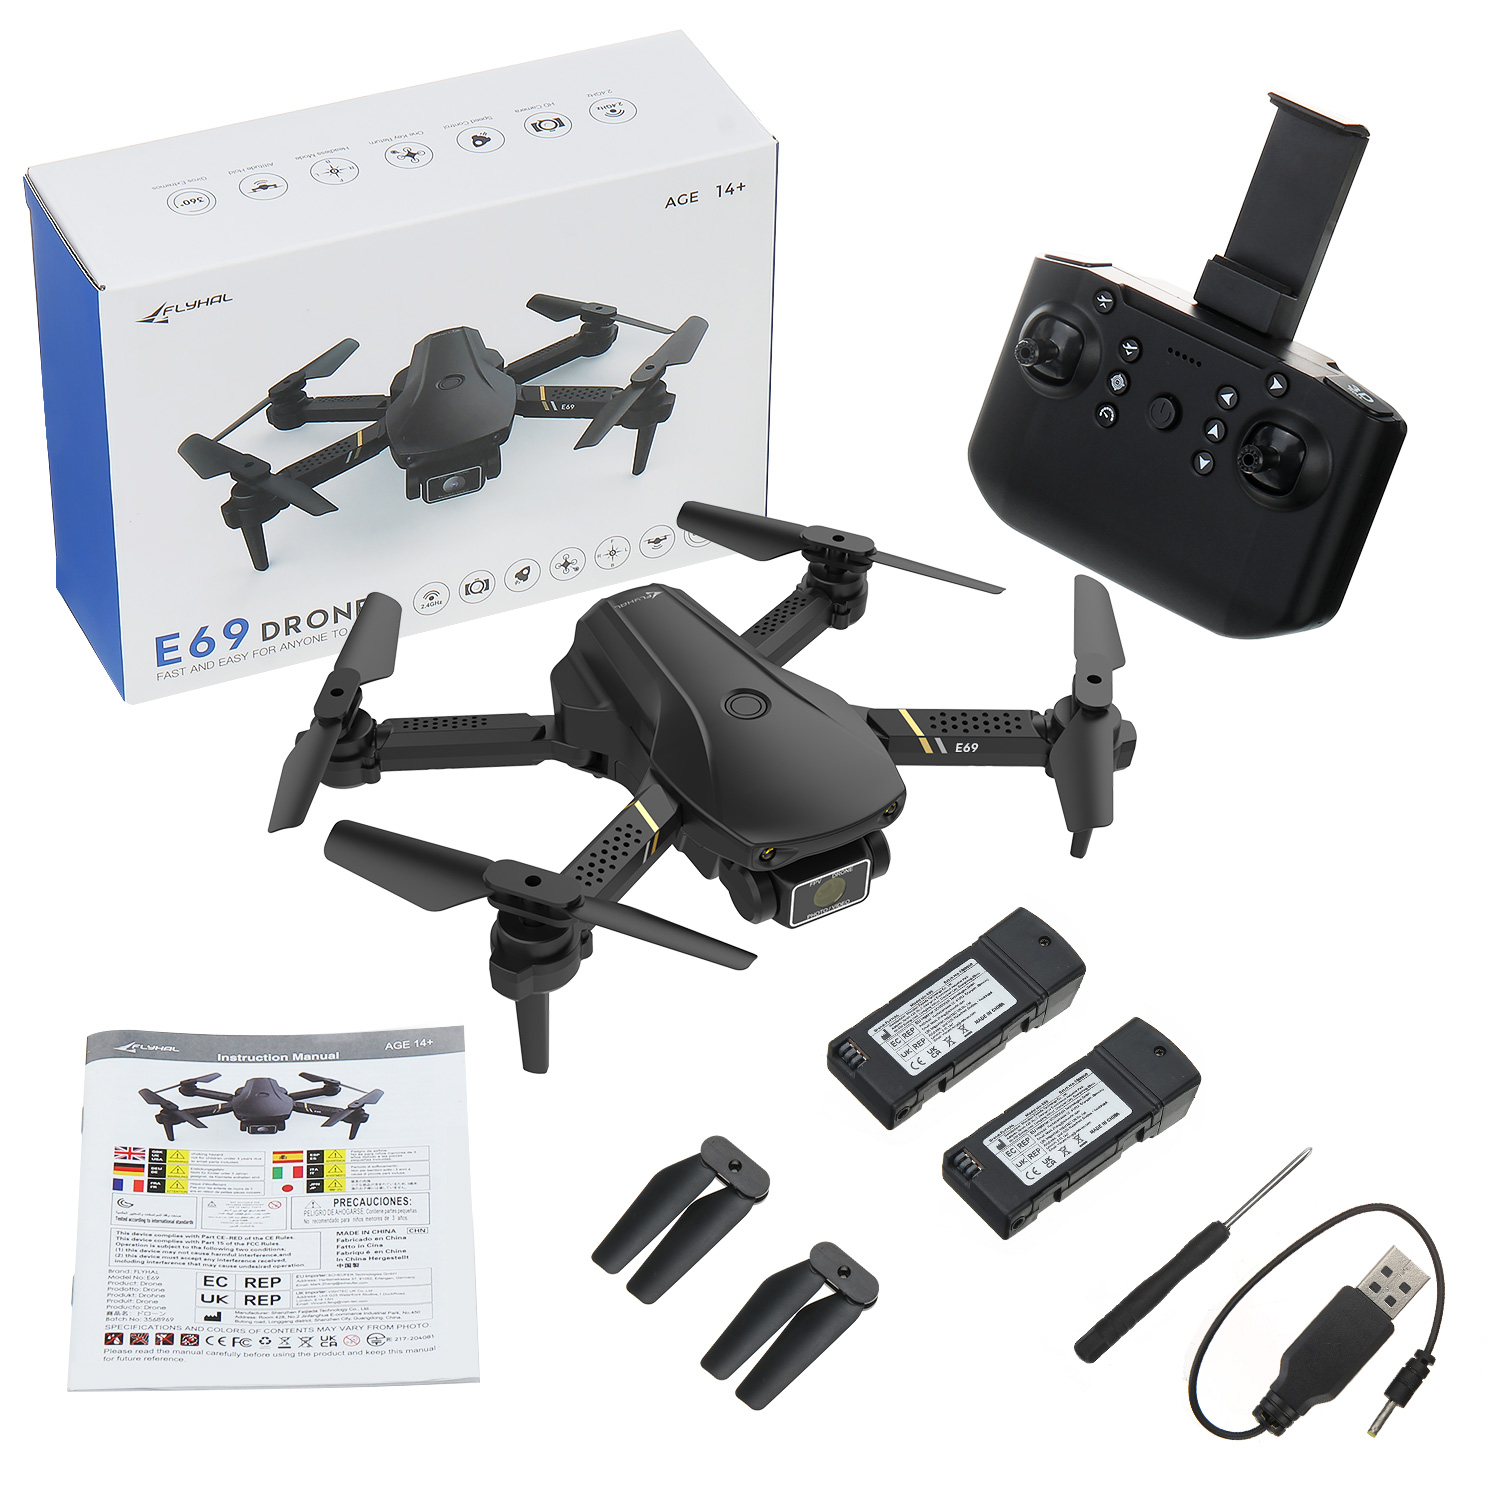 FLYHAL-E69-WIFI-FPV-With-1080P-HD-Wide-Angle-Camera-High-Hold-Mode-Foldable-RC-Drone-Quadcopter-RTF-1873920-9